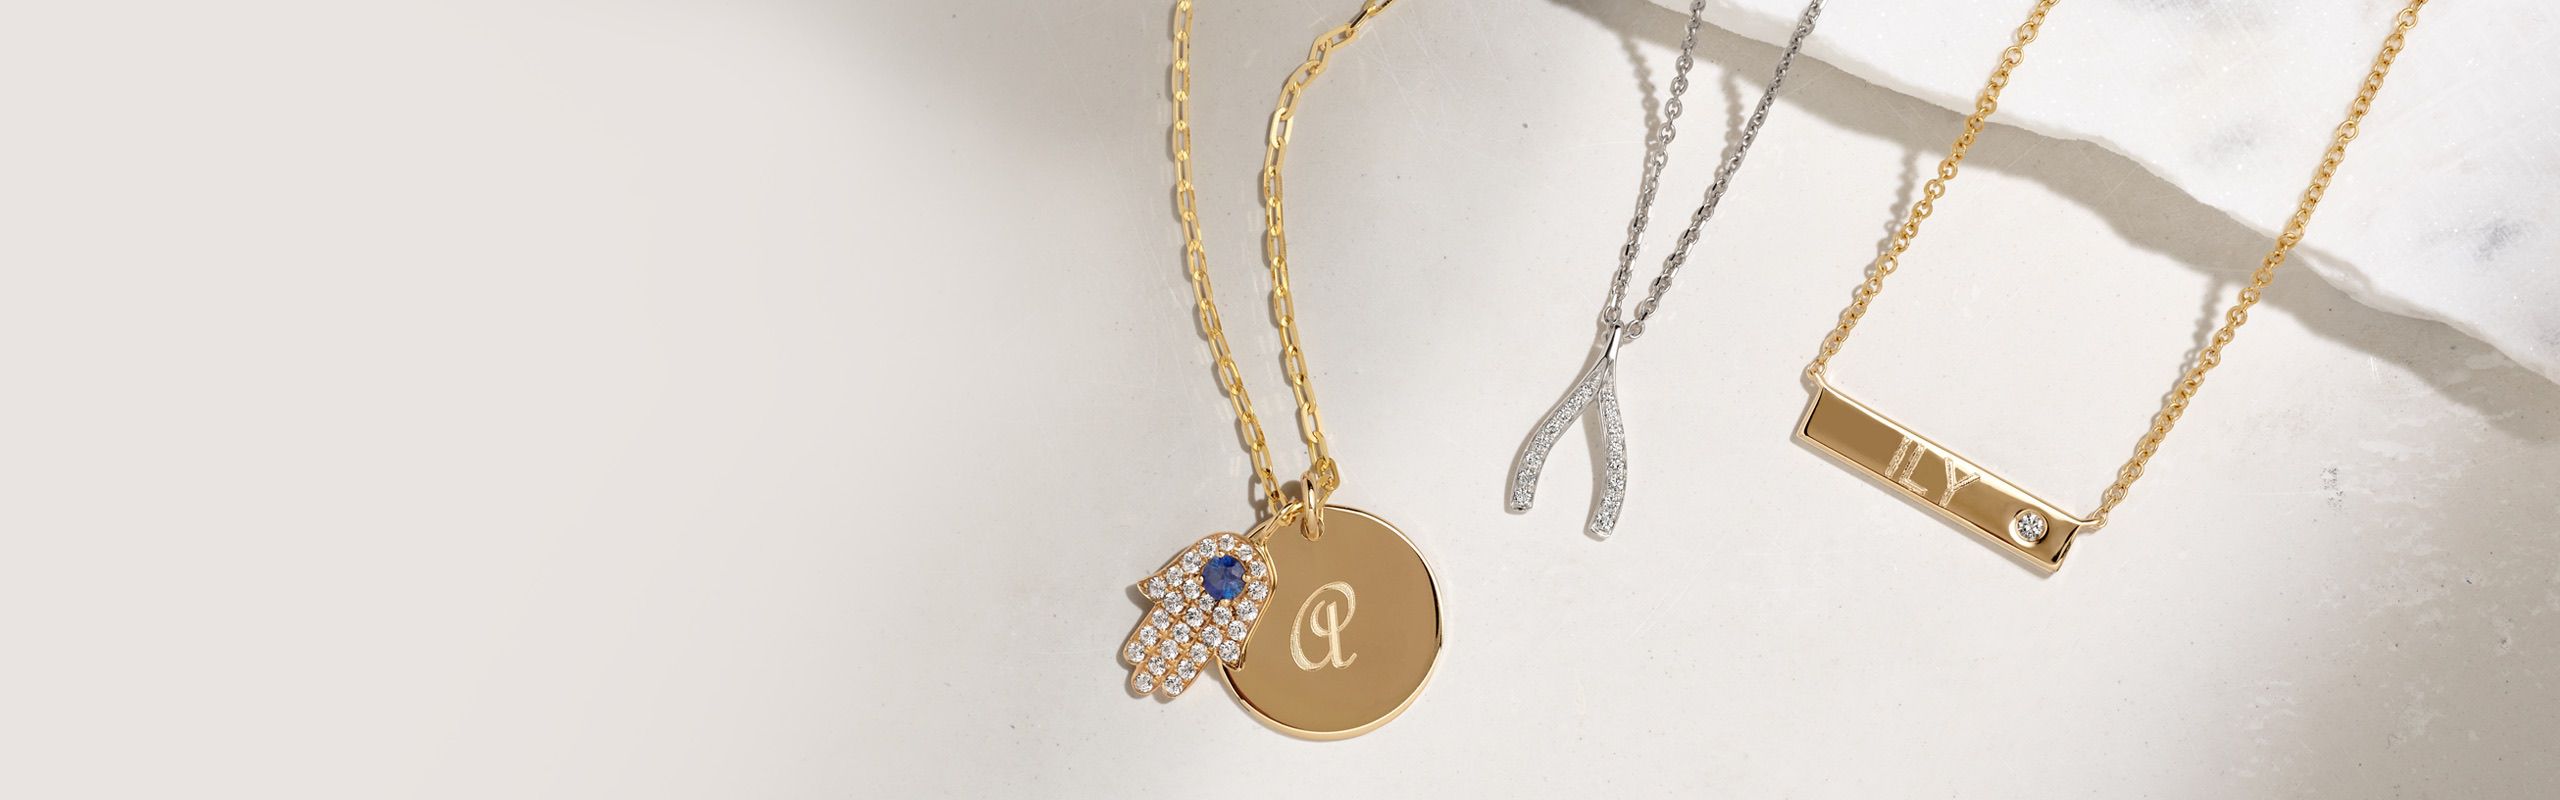 A collection of personalized jewelry